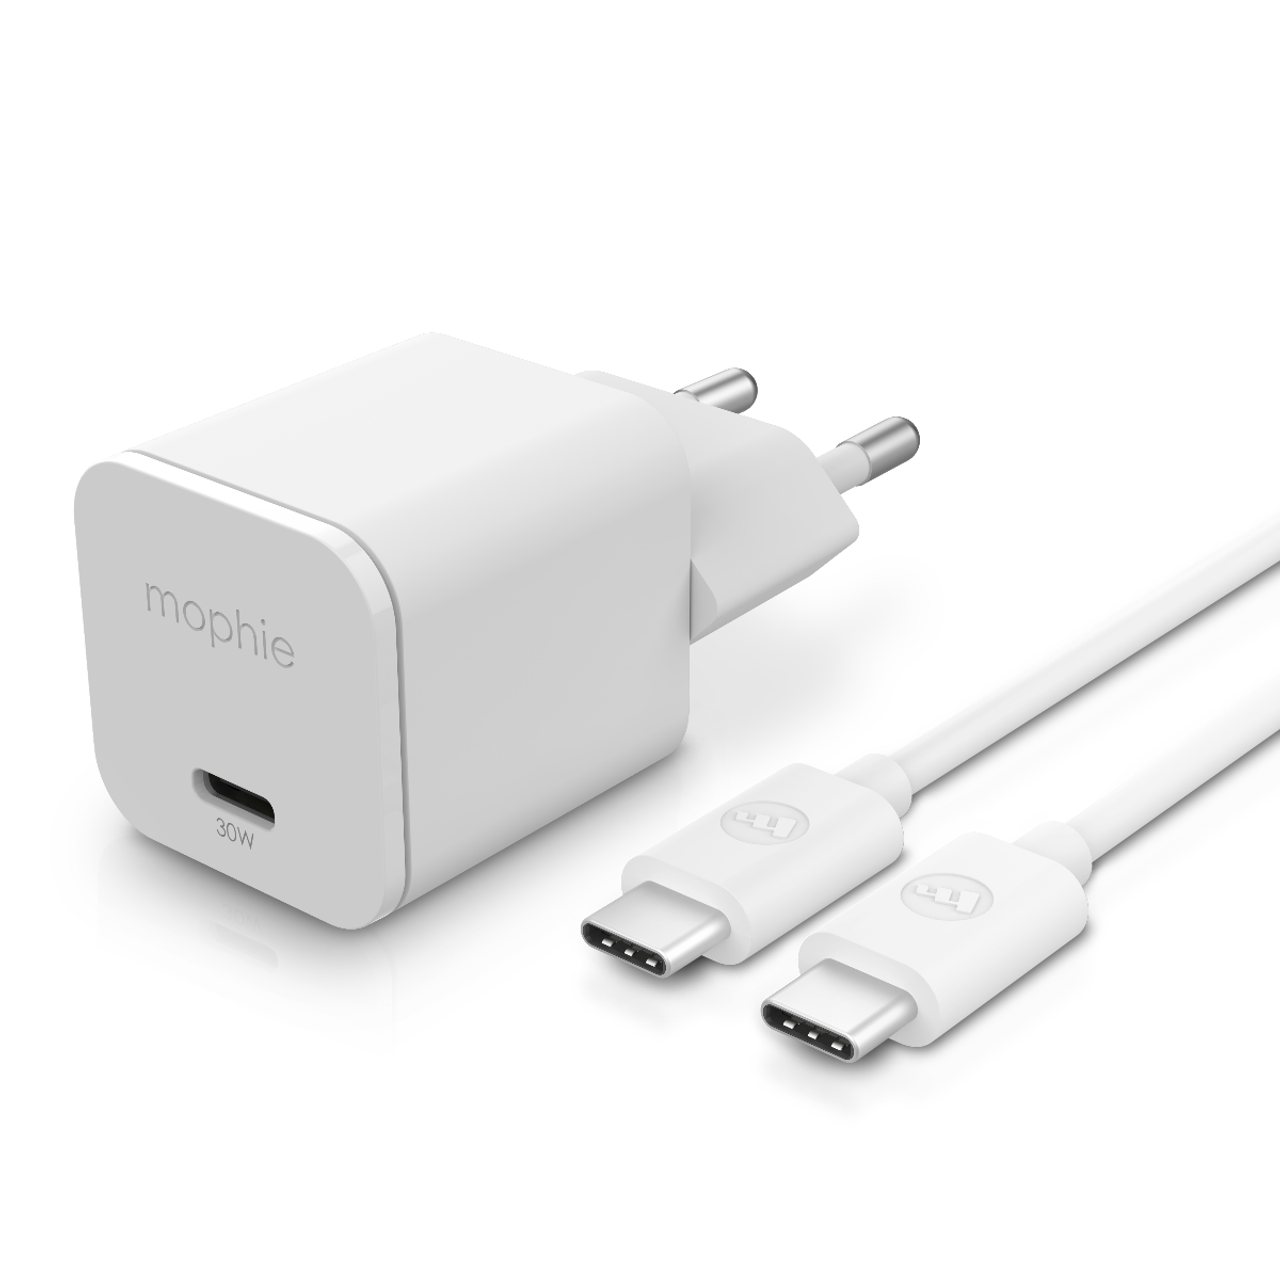 Apple 30W USB Type-C Power Adapter with 2m USB-C Cable (Used) 